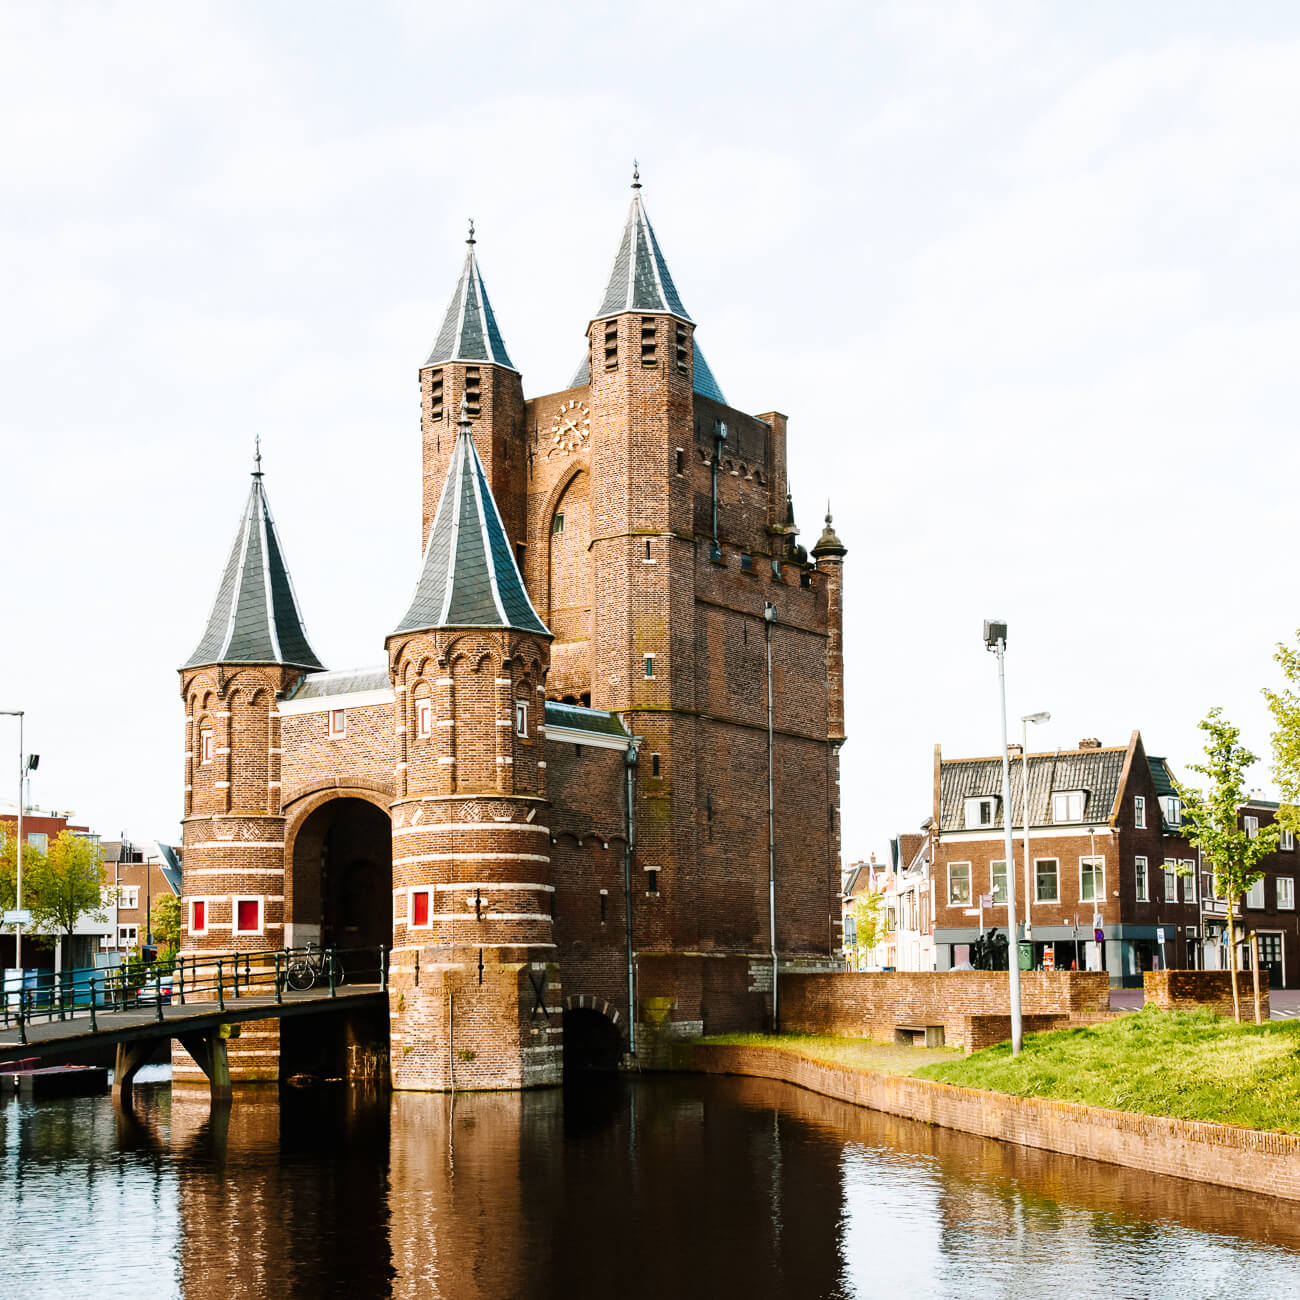 A quick stop at the Amsterdamse Poort, the old city gate of Haarlem, from the 15the century, can not be missed.